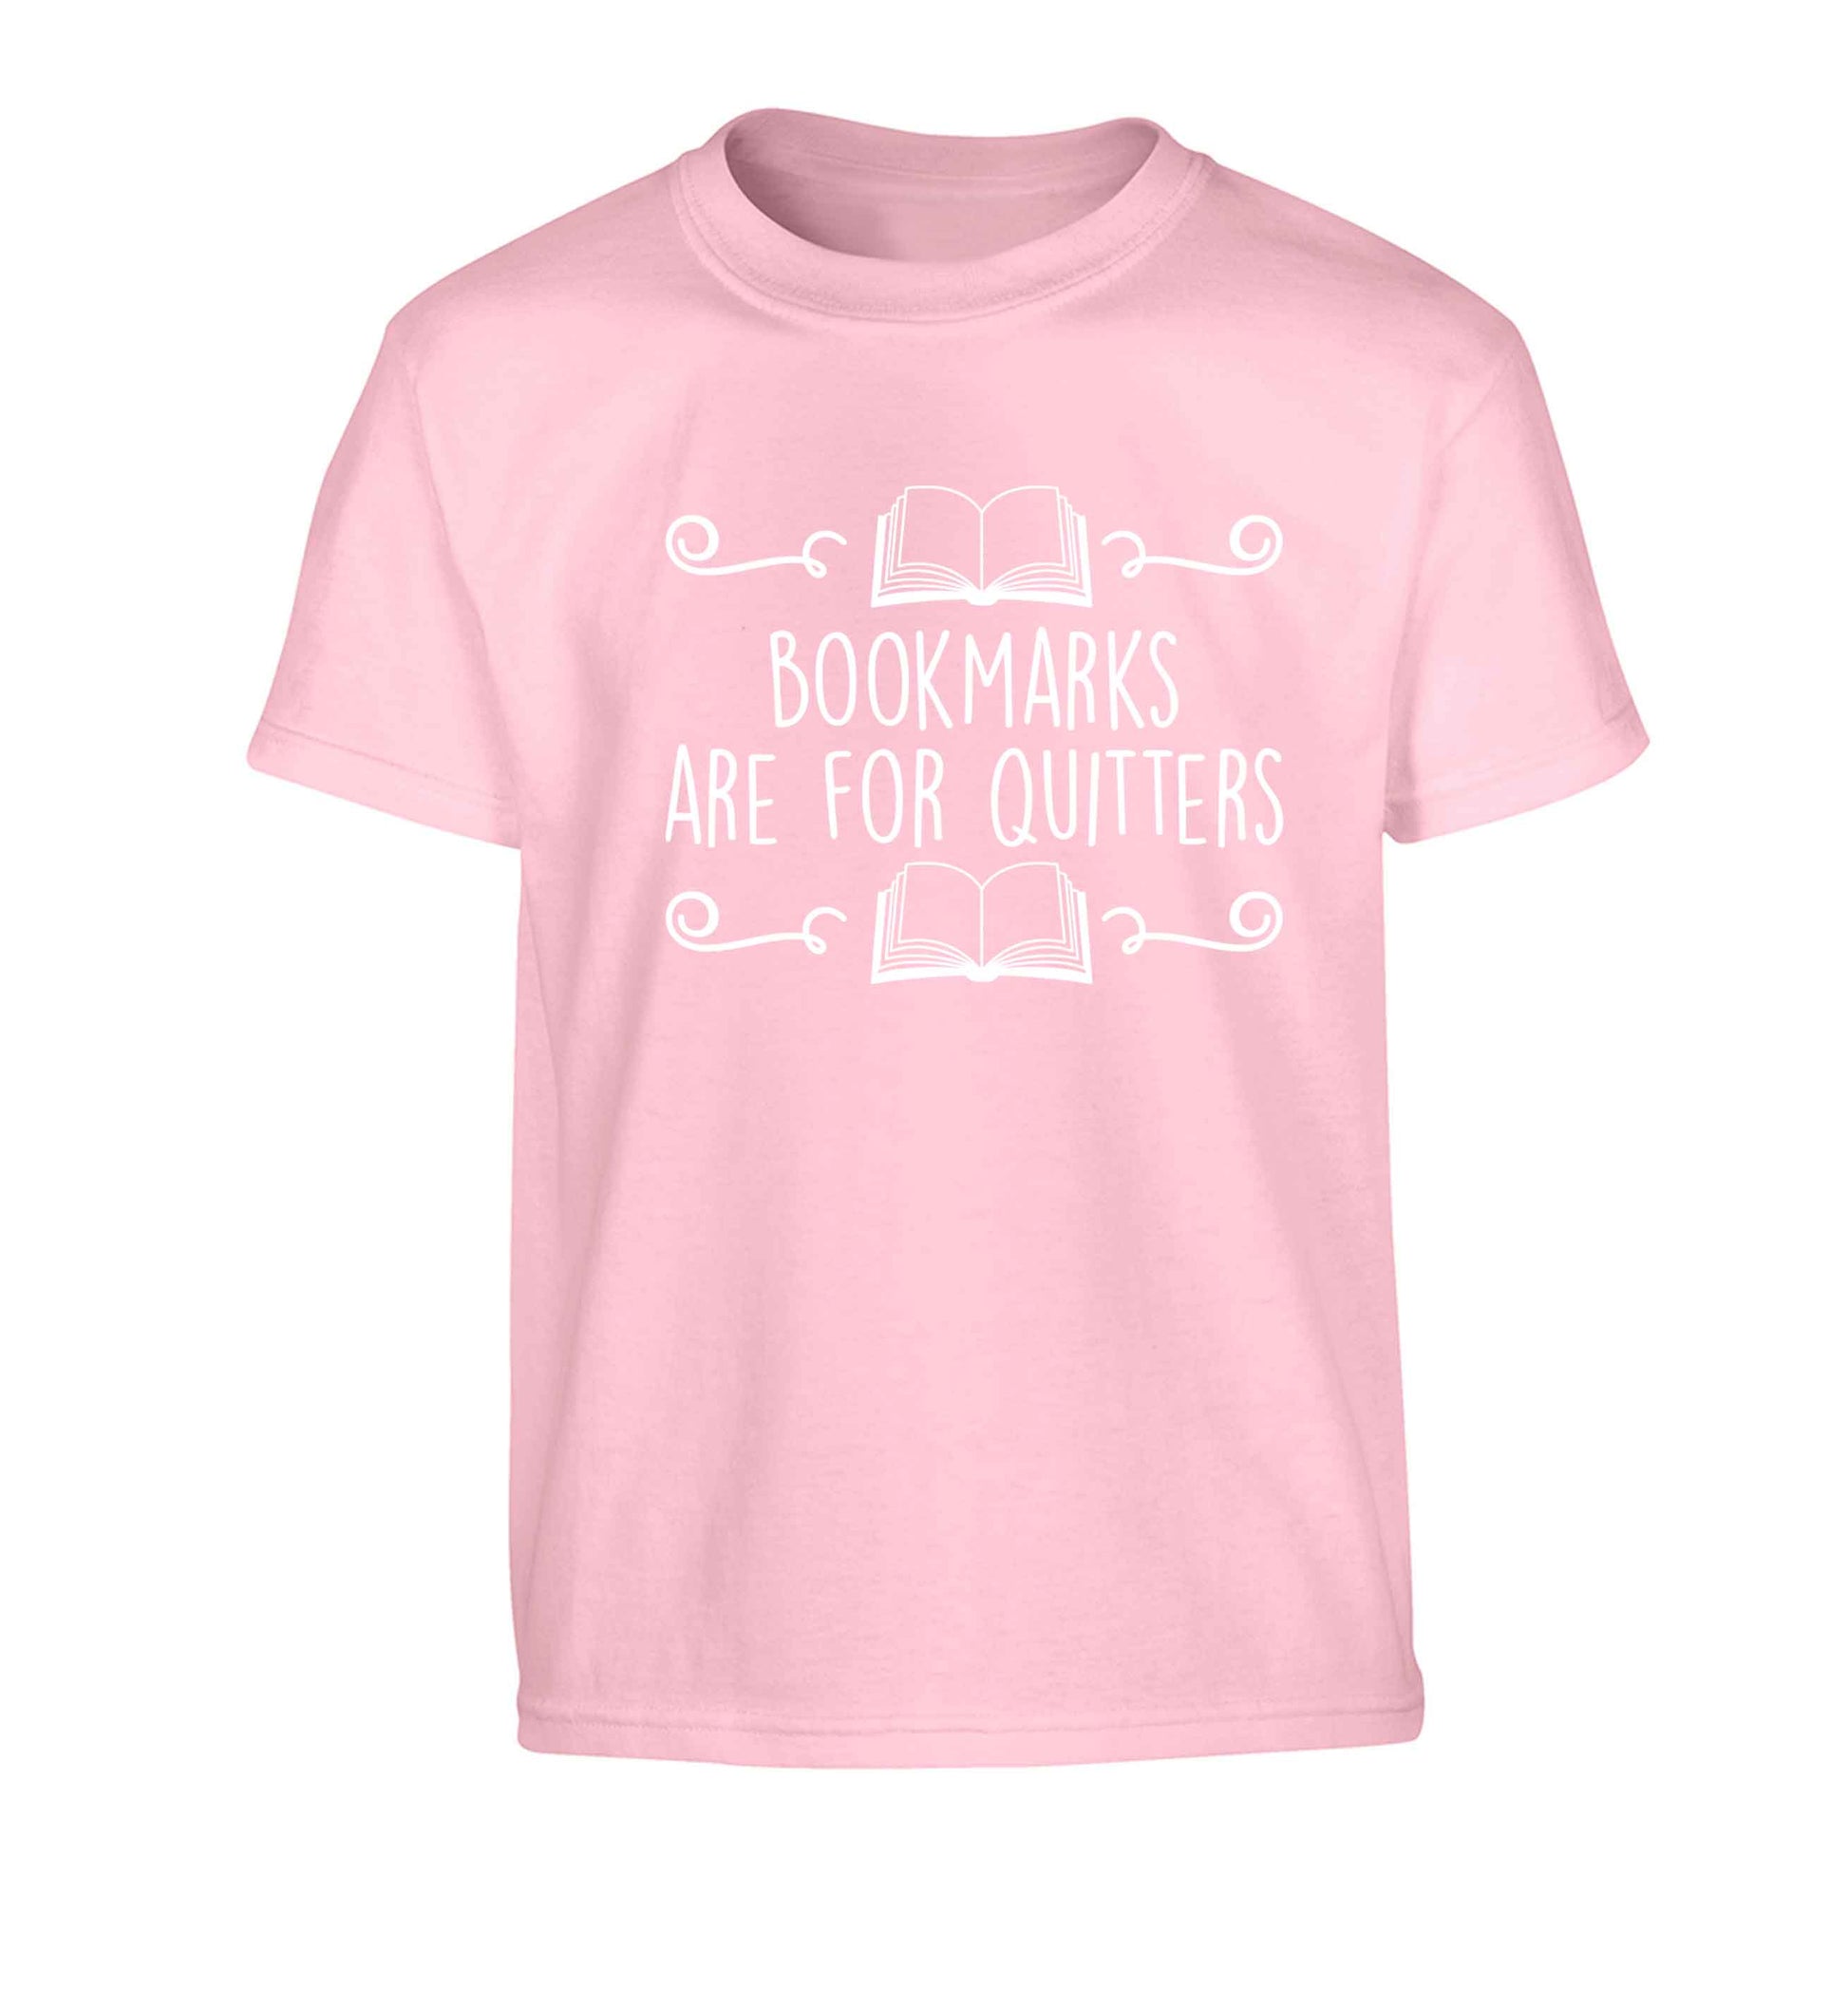 Bookmarks are for quitters Children's light pink Tshirt 12-13 Years